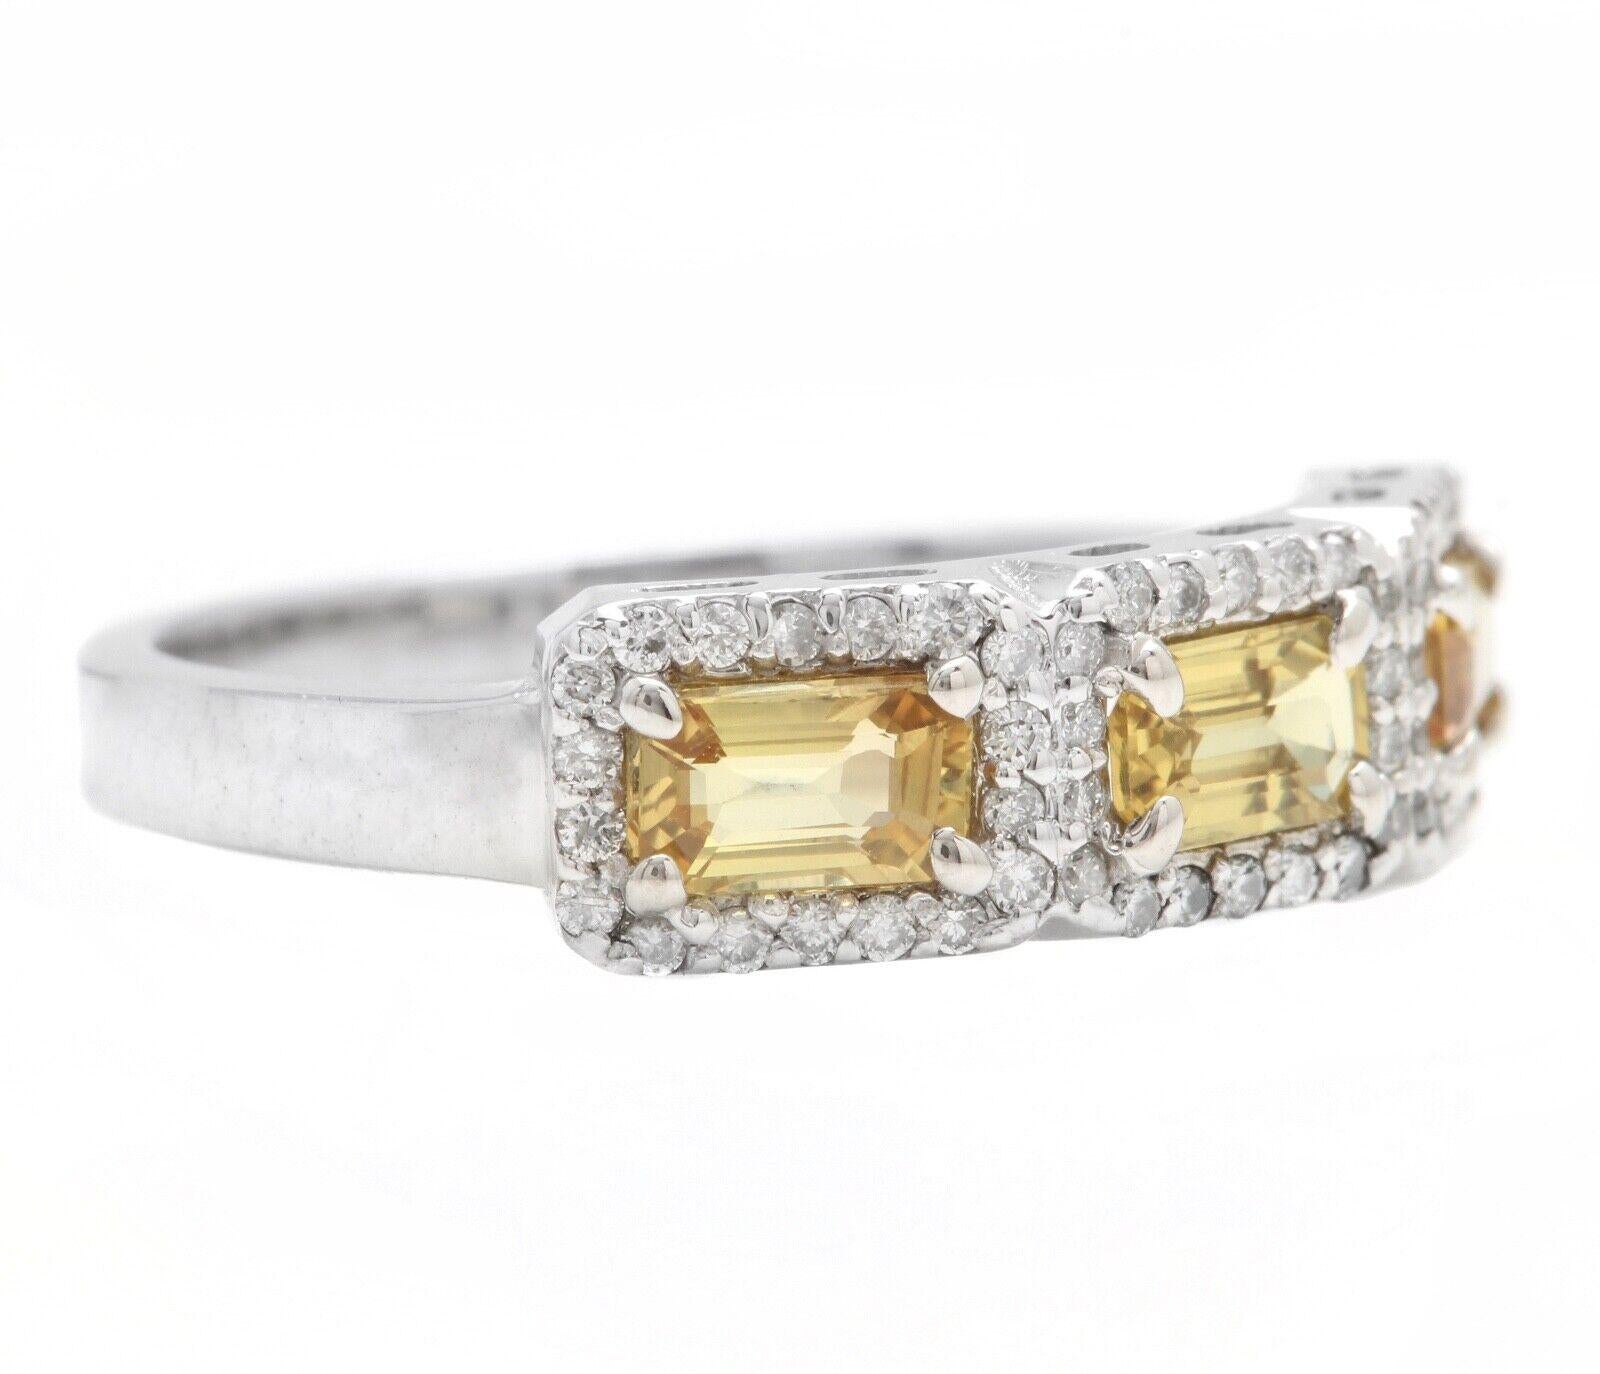 1.35 Carats Exquisite Natural Yellow Sapphire and Diamond 14K Solid White Gold Ring

Suggested Replacement Value $6,000.00

Total Yellow Sapphire Weight is: Approx. 1.05 Carats 

Sapphire Treatment: Heat

Natural Round Diamonds Weight: Approx. 0.30